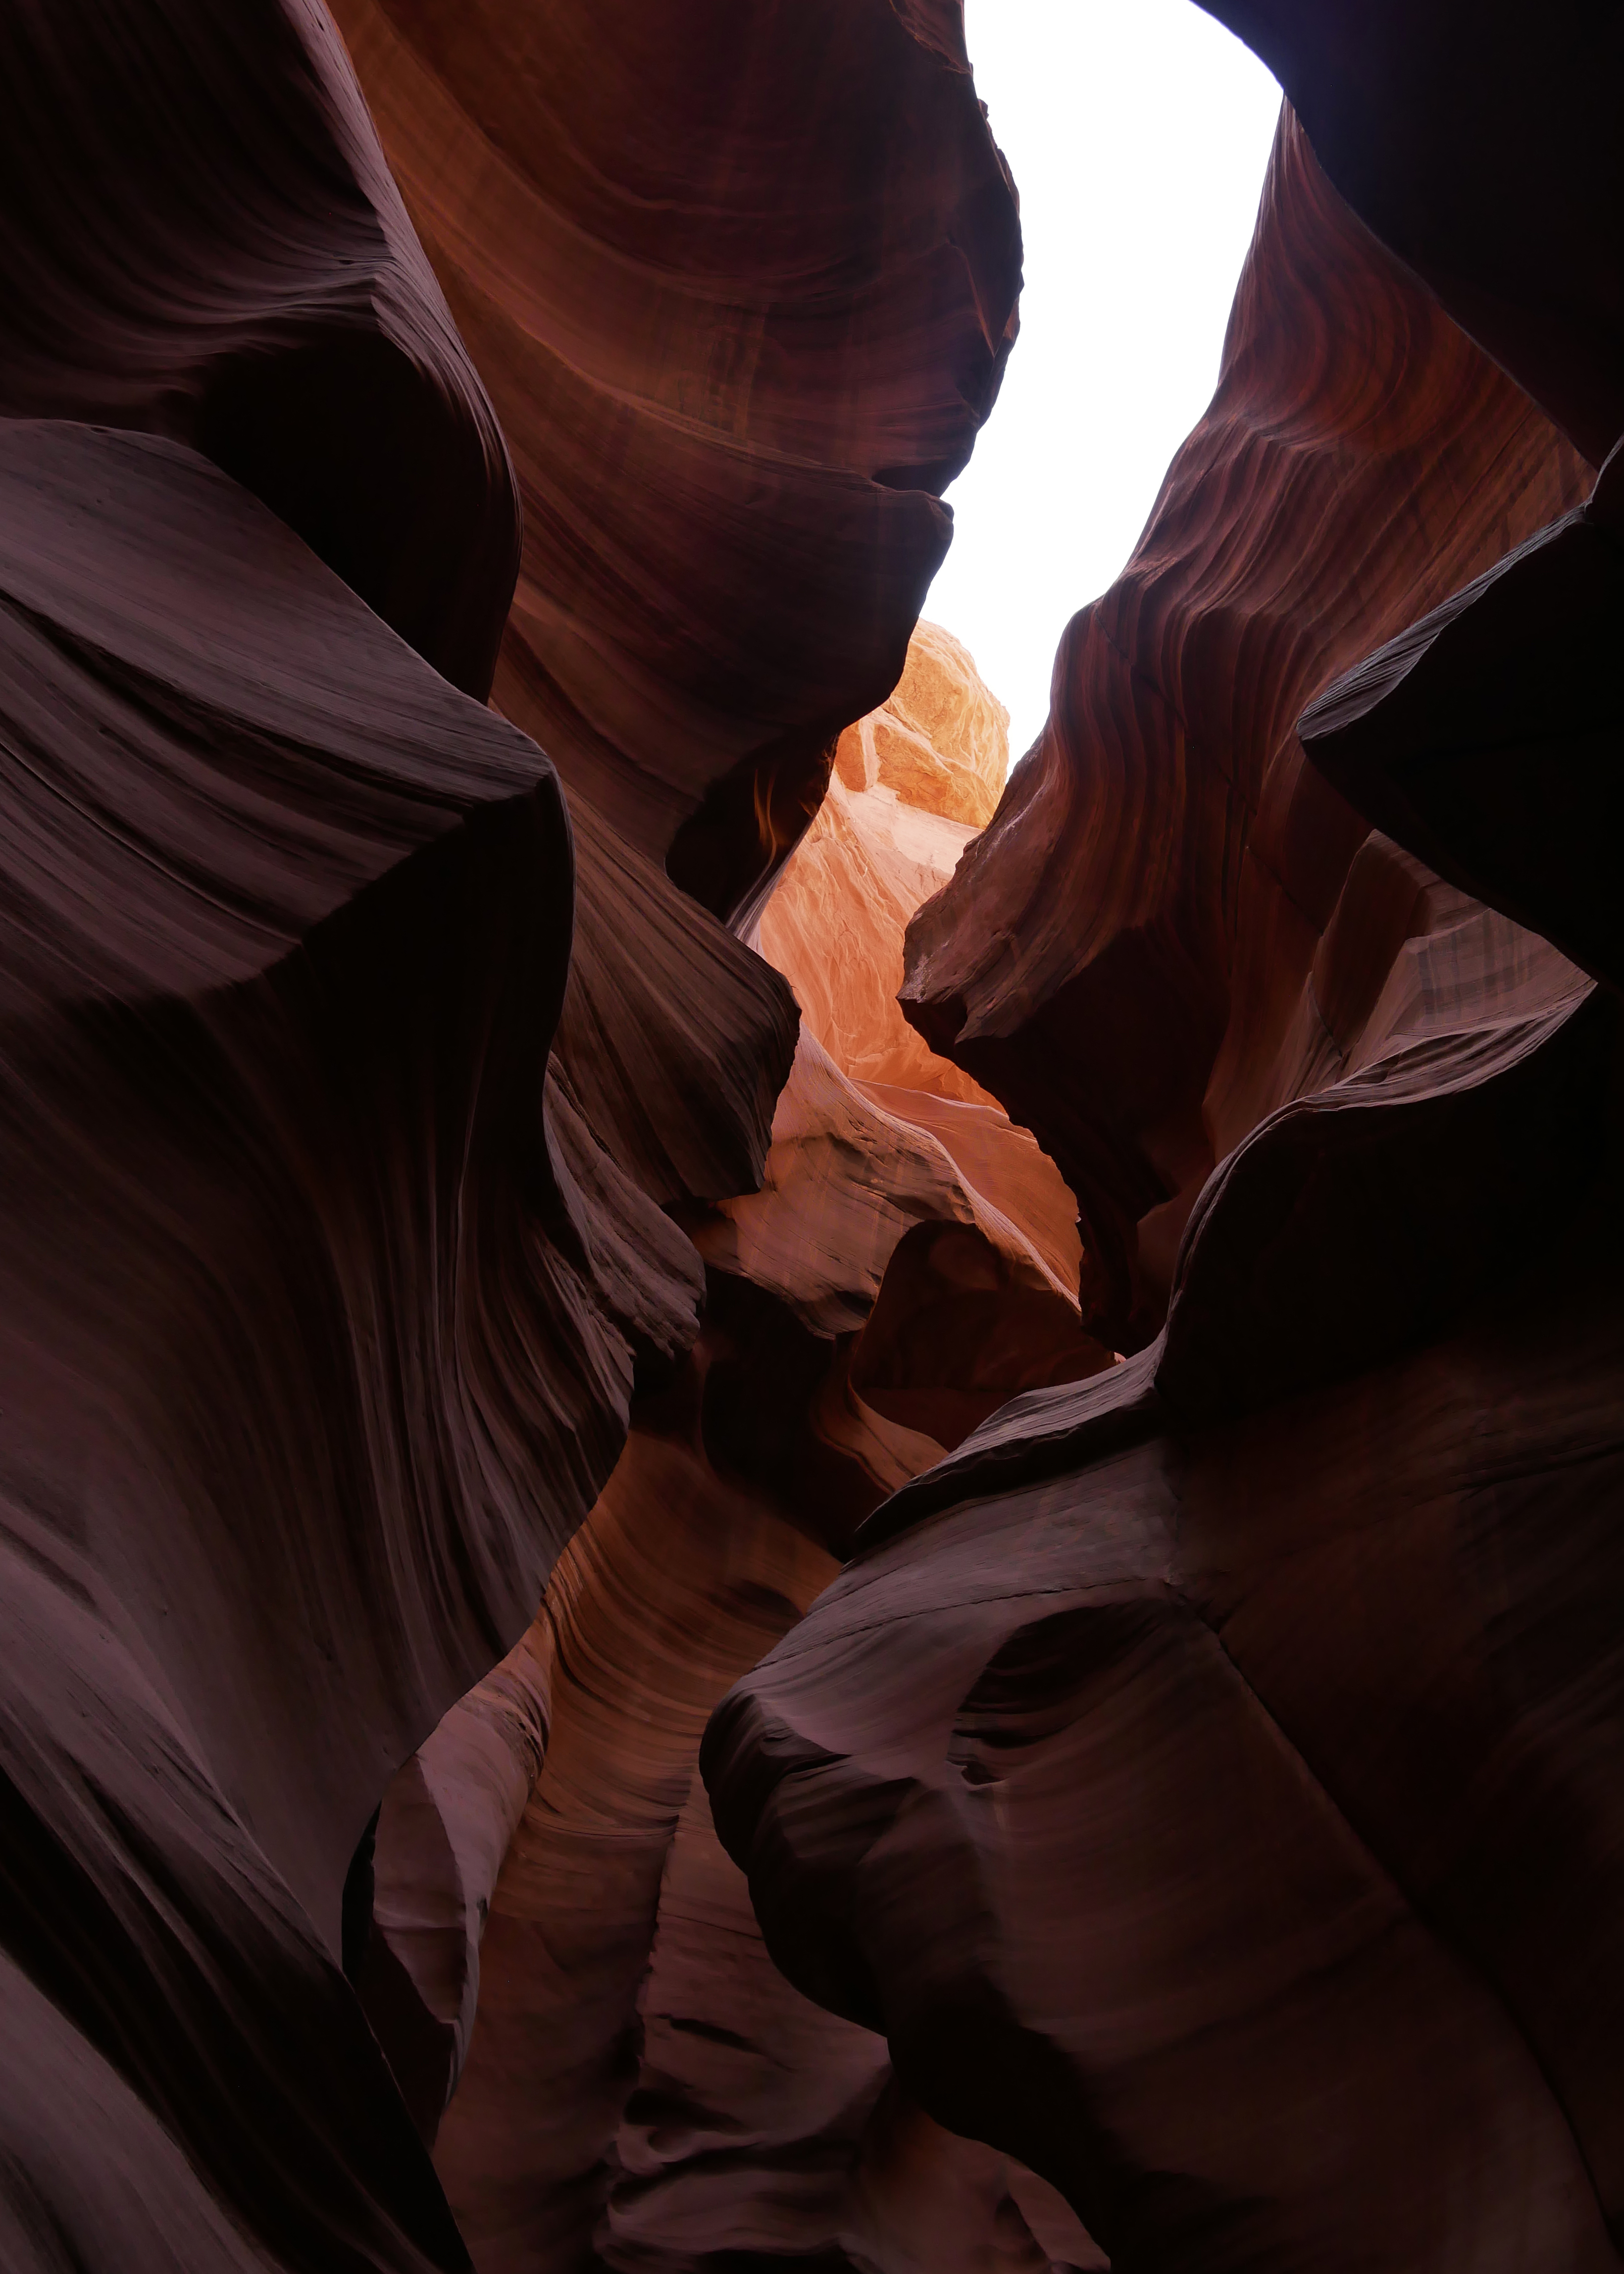 Tips in photographing inside Lower Antelope Canyon